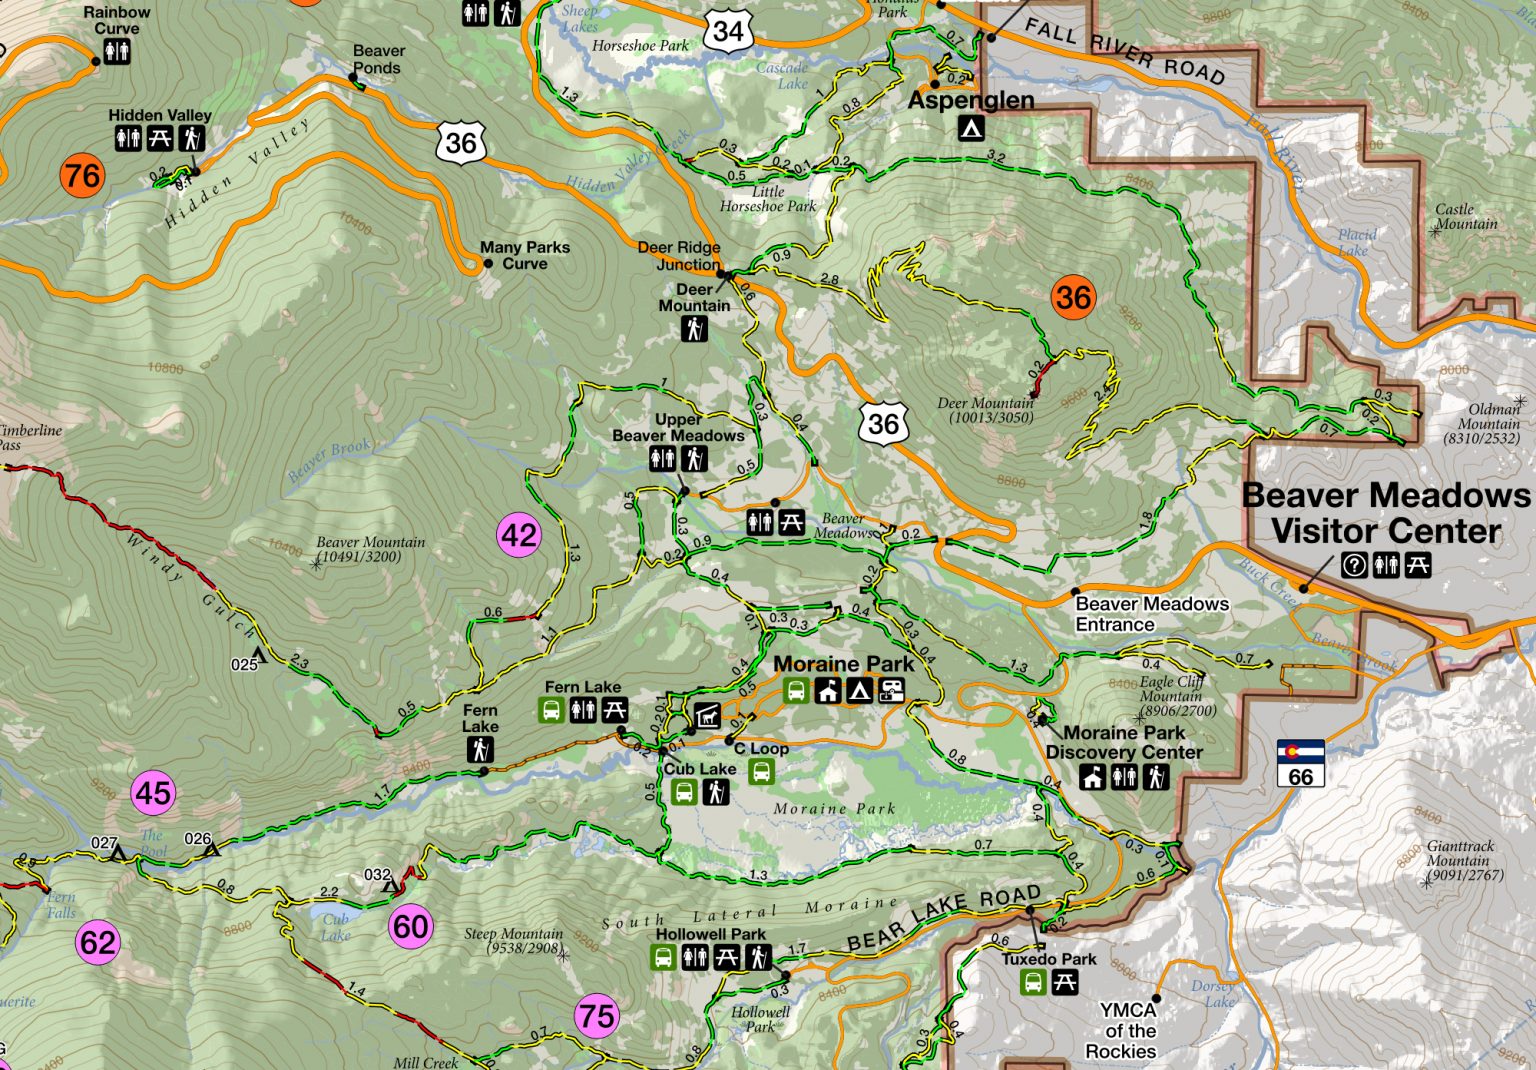 day-hikes-of-rocky-mountain-national-park-map-guide